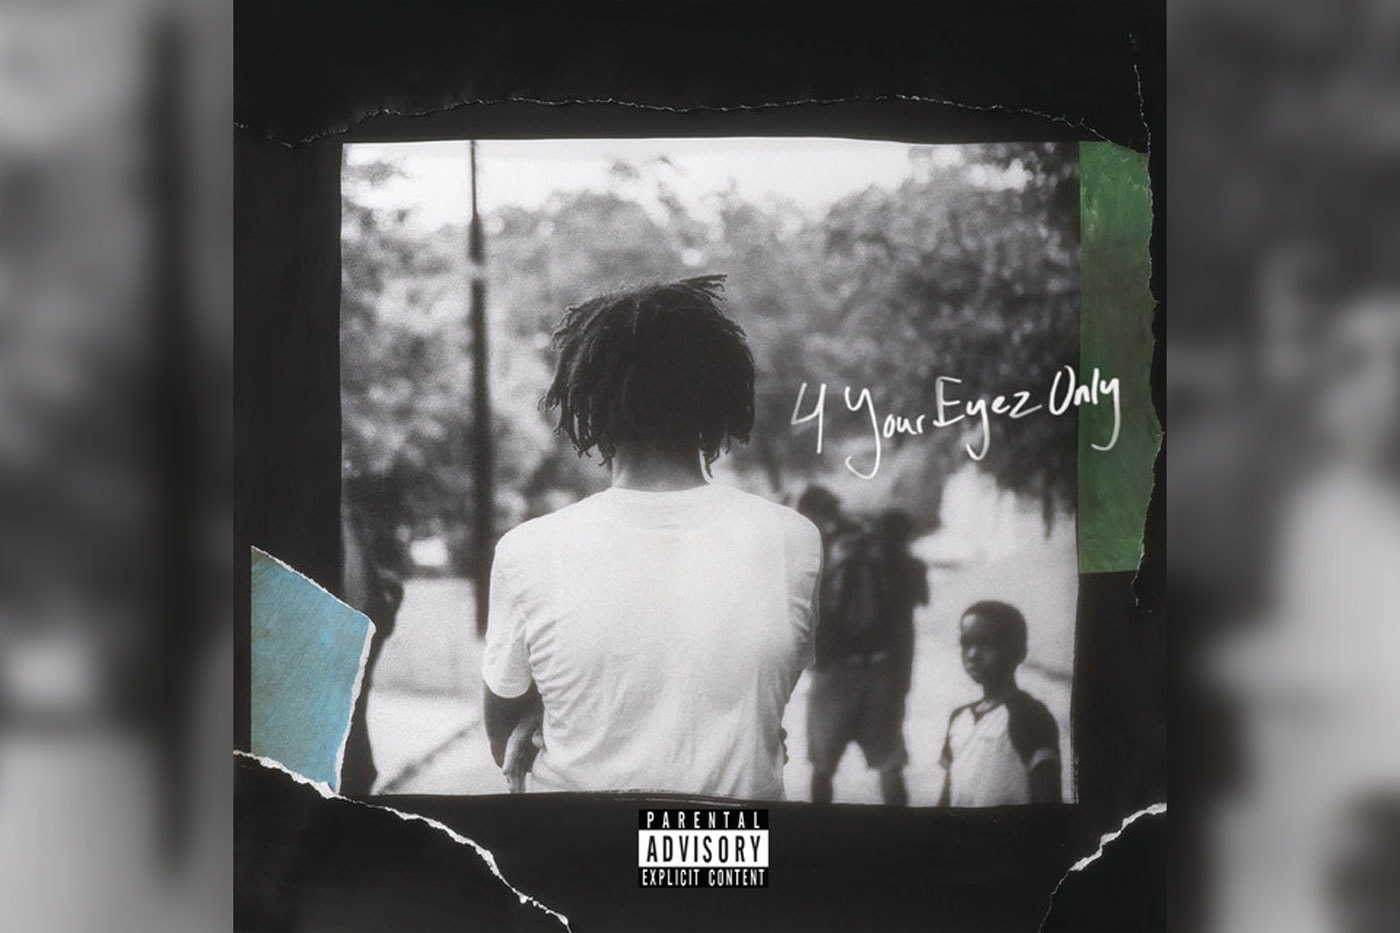 J. Cole's Entire '4 Your Eyez Only' Album is on Billboard's Hot 100